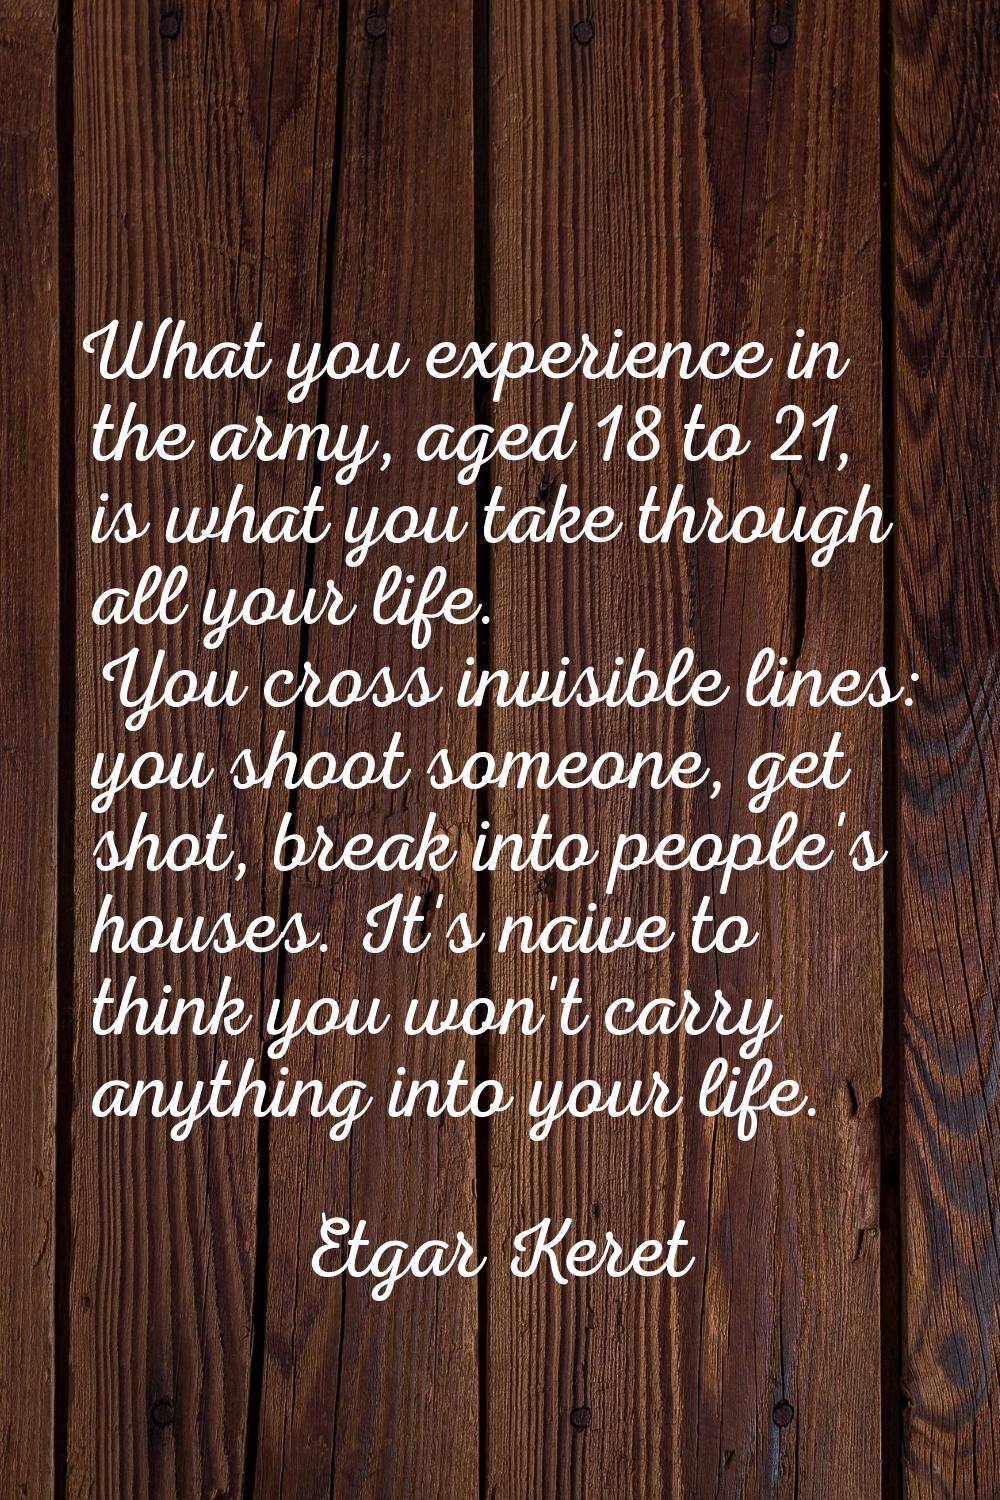 What you experience in the army, aged 18 to 21, is what you take through all your life. You cross i